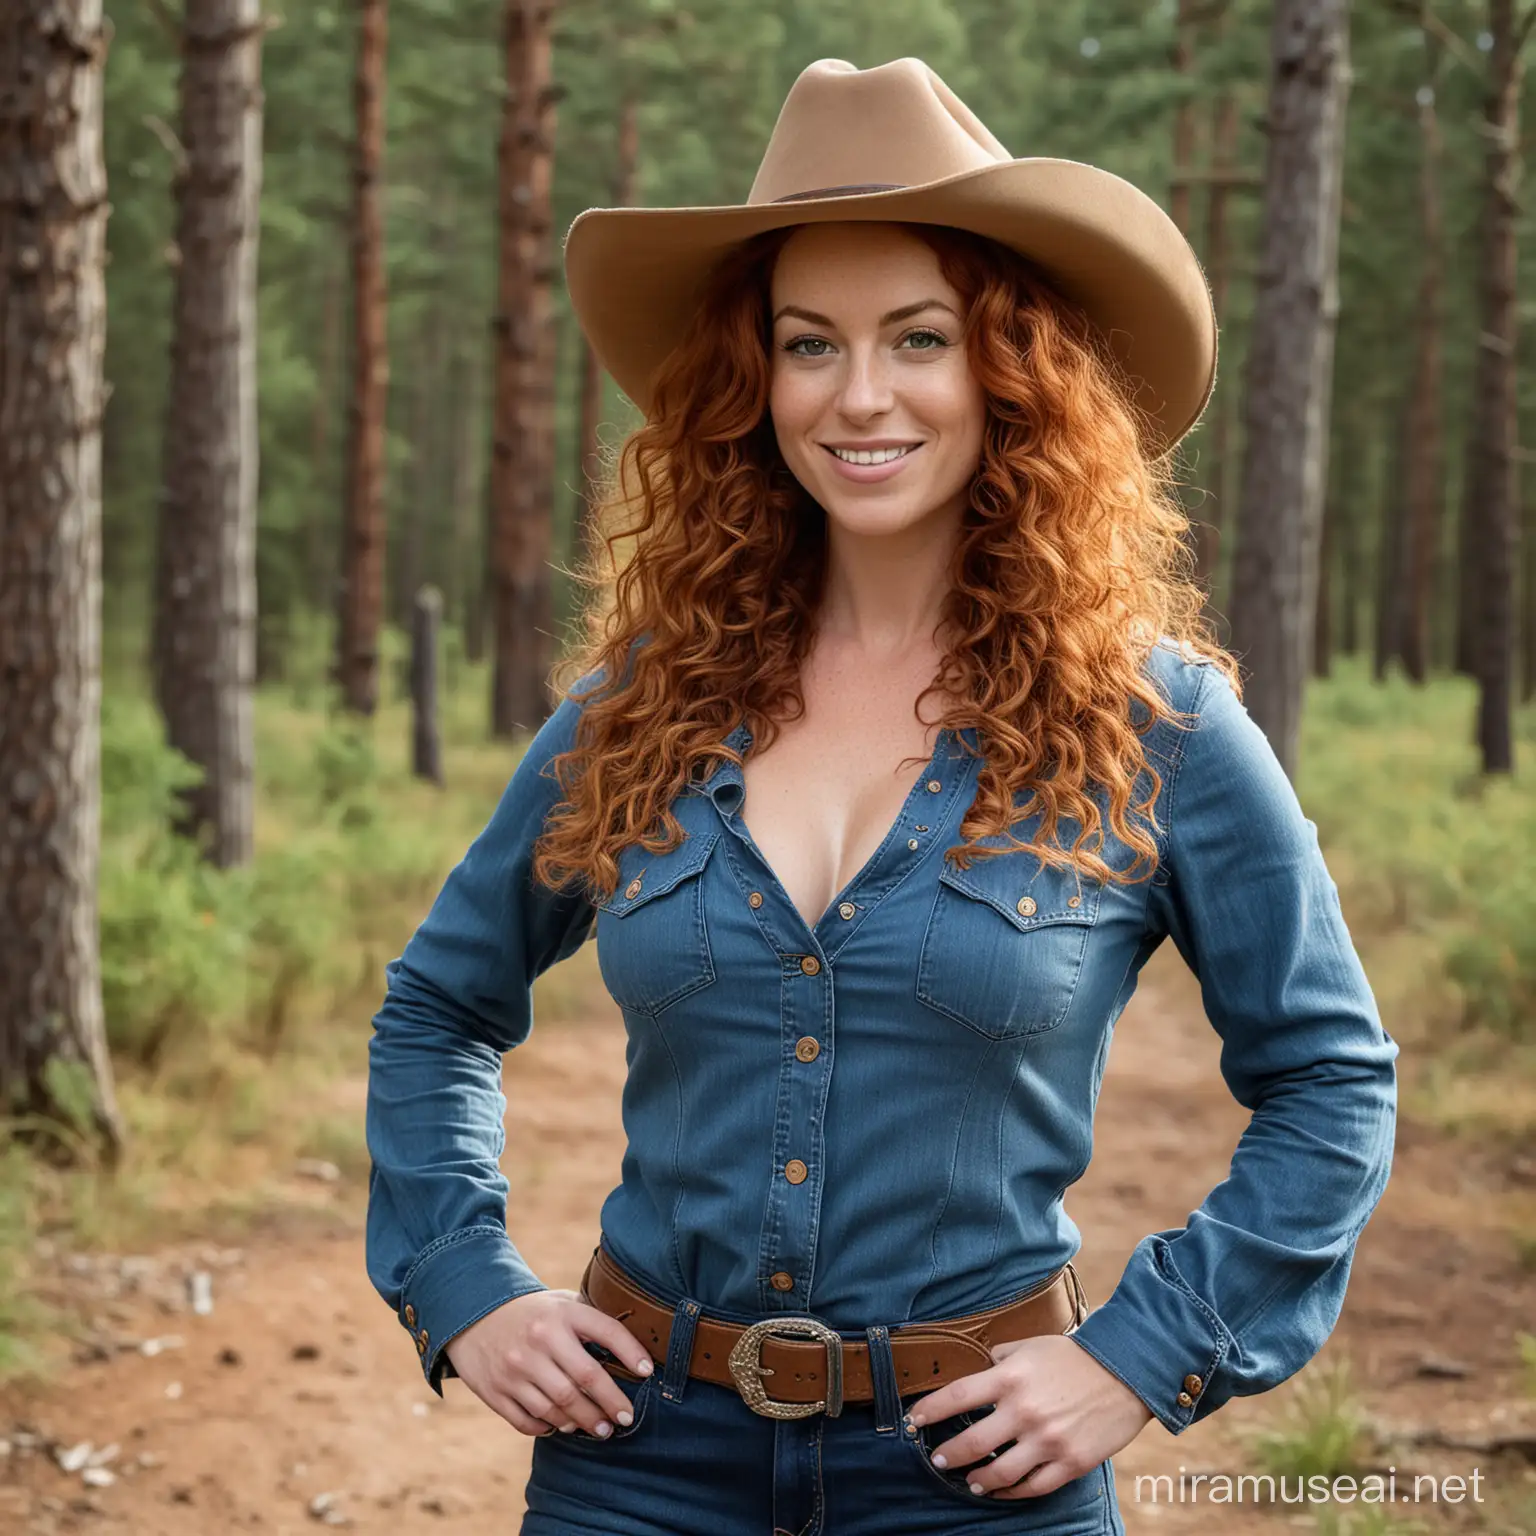 Irish Woman with Curly Red Hair and Cowboy Hat in Western Forest